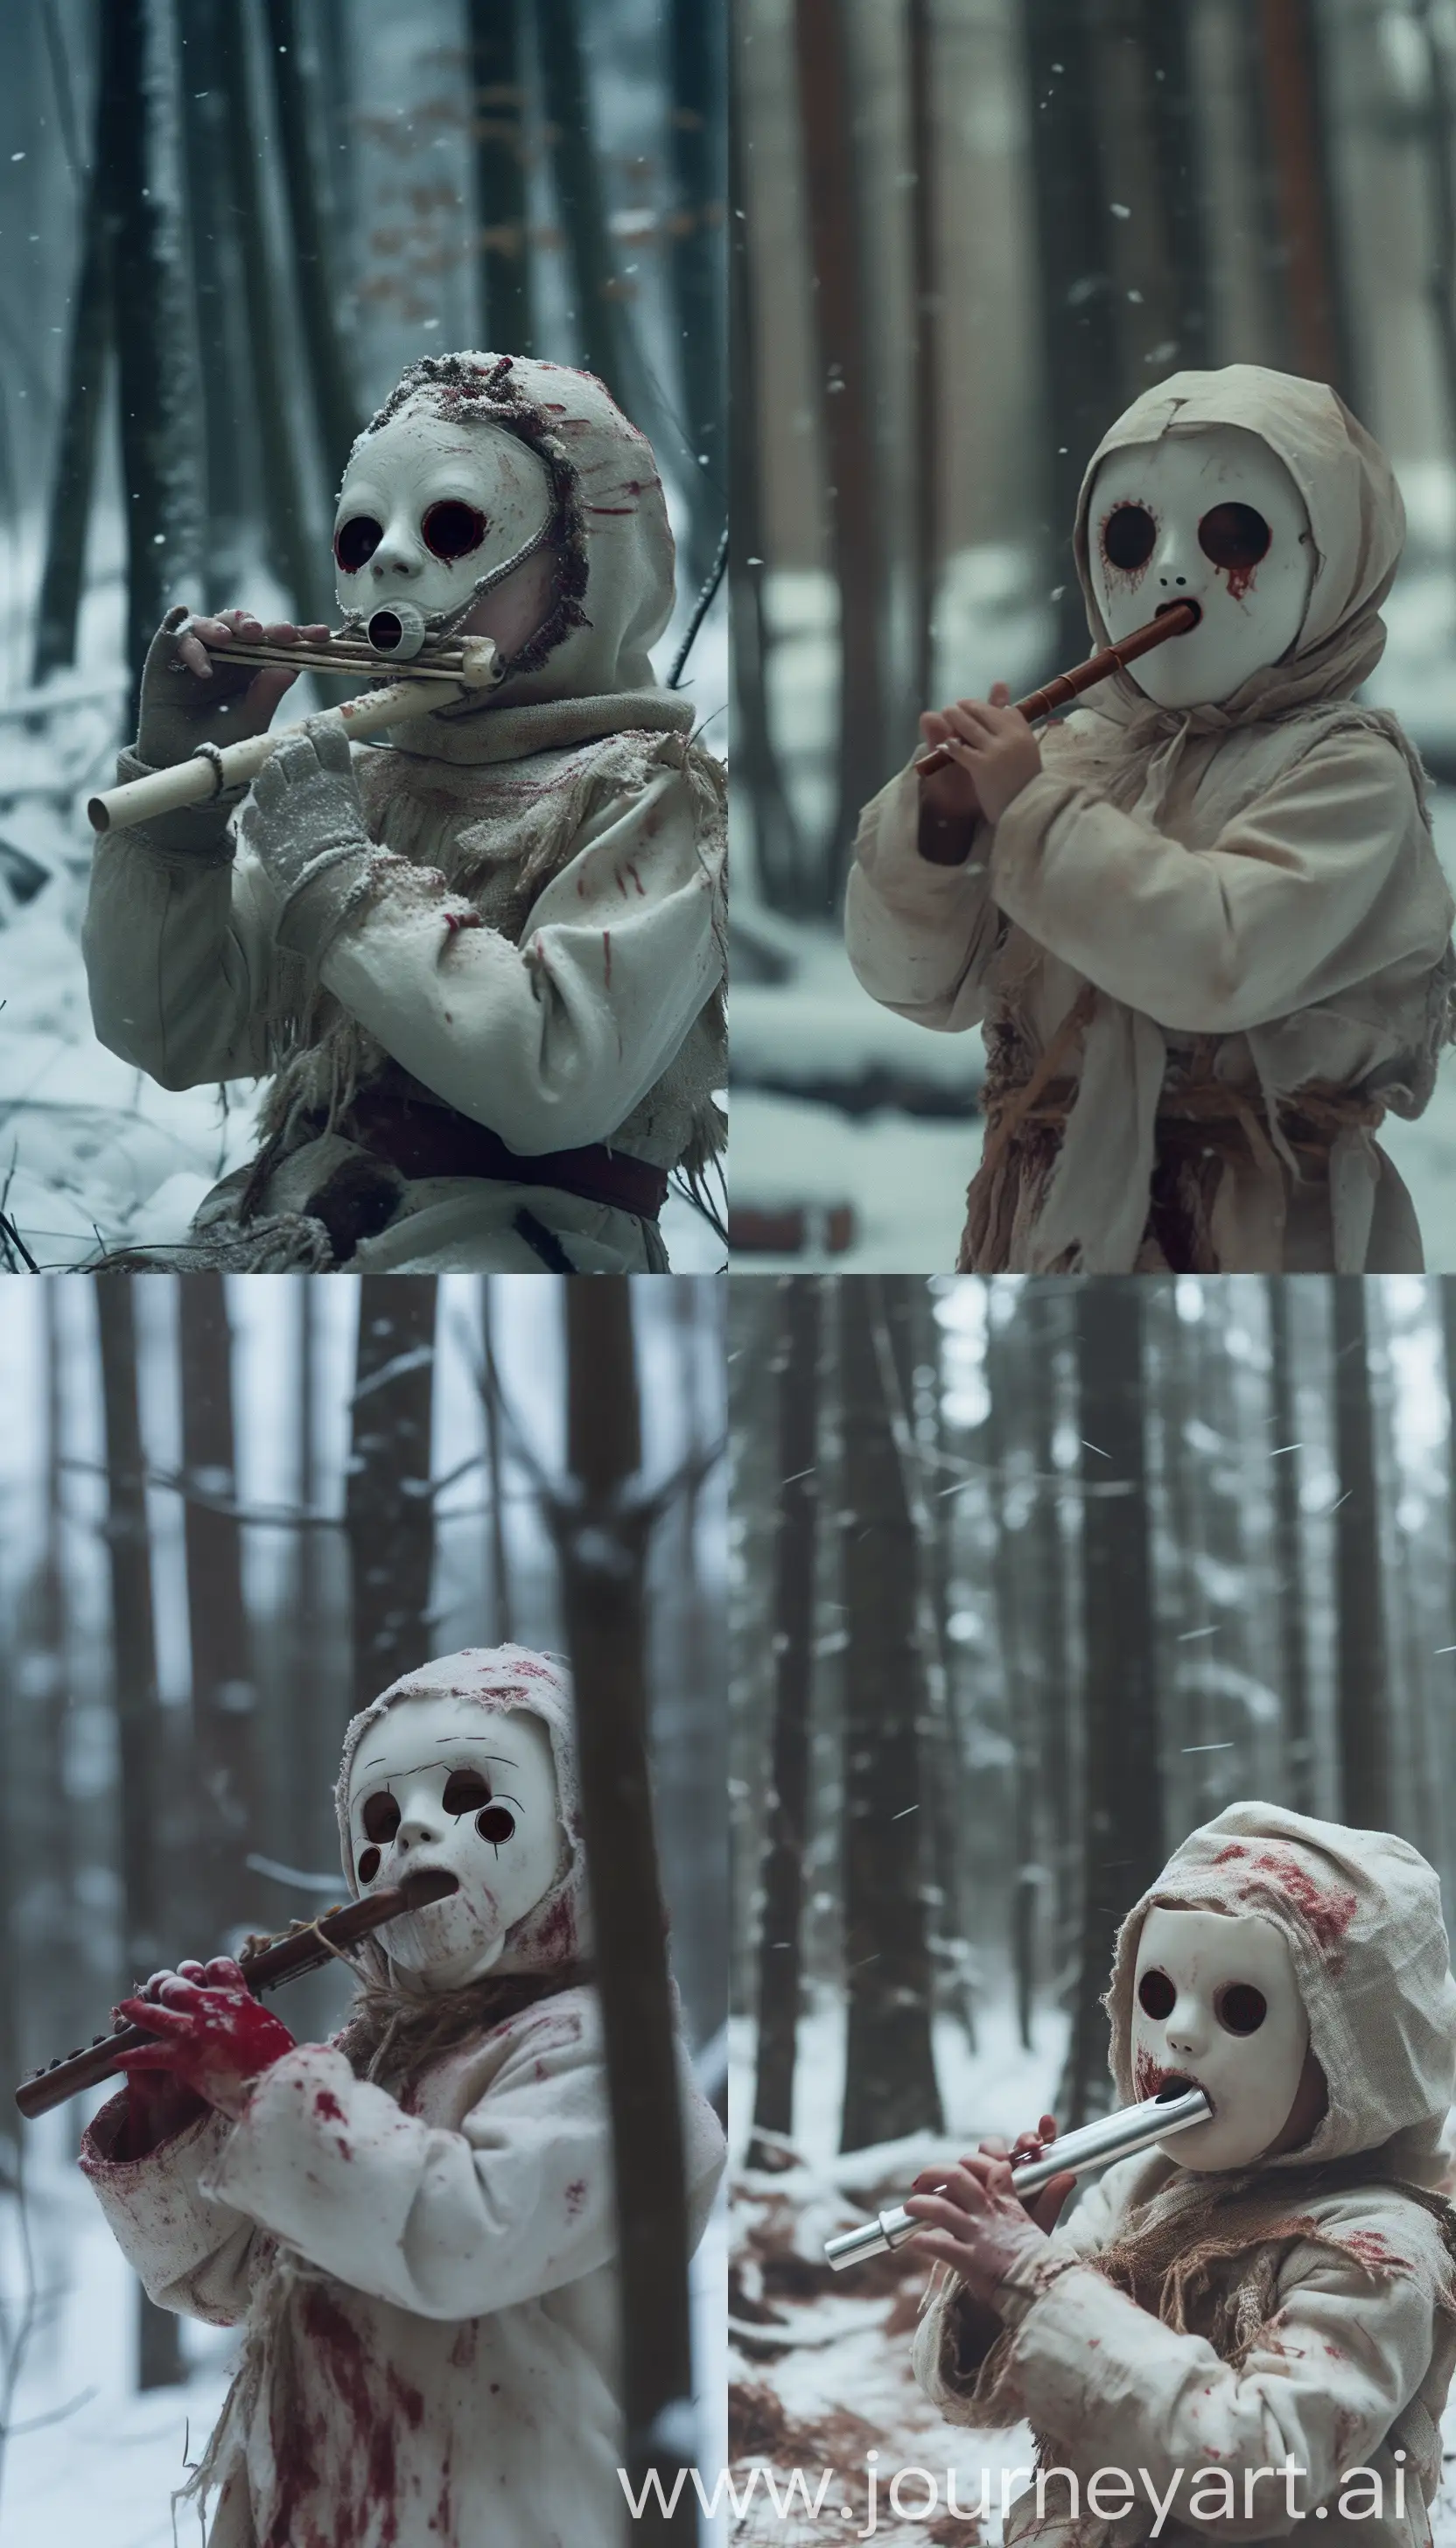 https://i.ytimg.com/vi/cYSLx90BB-g/maxresdefault.jpg a cinematic horror scene a child playing tribal flute in the snowing forest wearing a white mask and old Eskimo clothes with blood circular dark eyes, filmed with ARRI Alexa and Mini-lenses anamorphic, in the style of director Roman Osin, --ar 4:7 --q .25